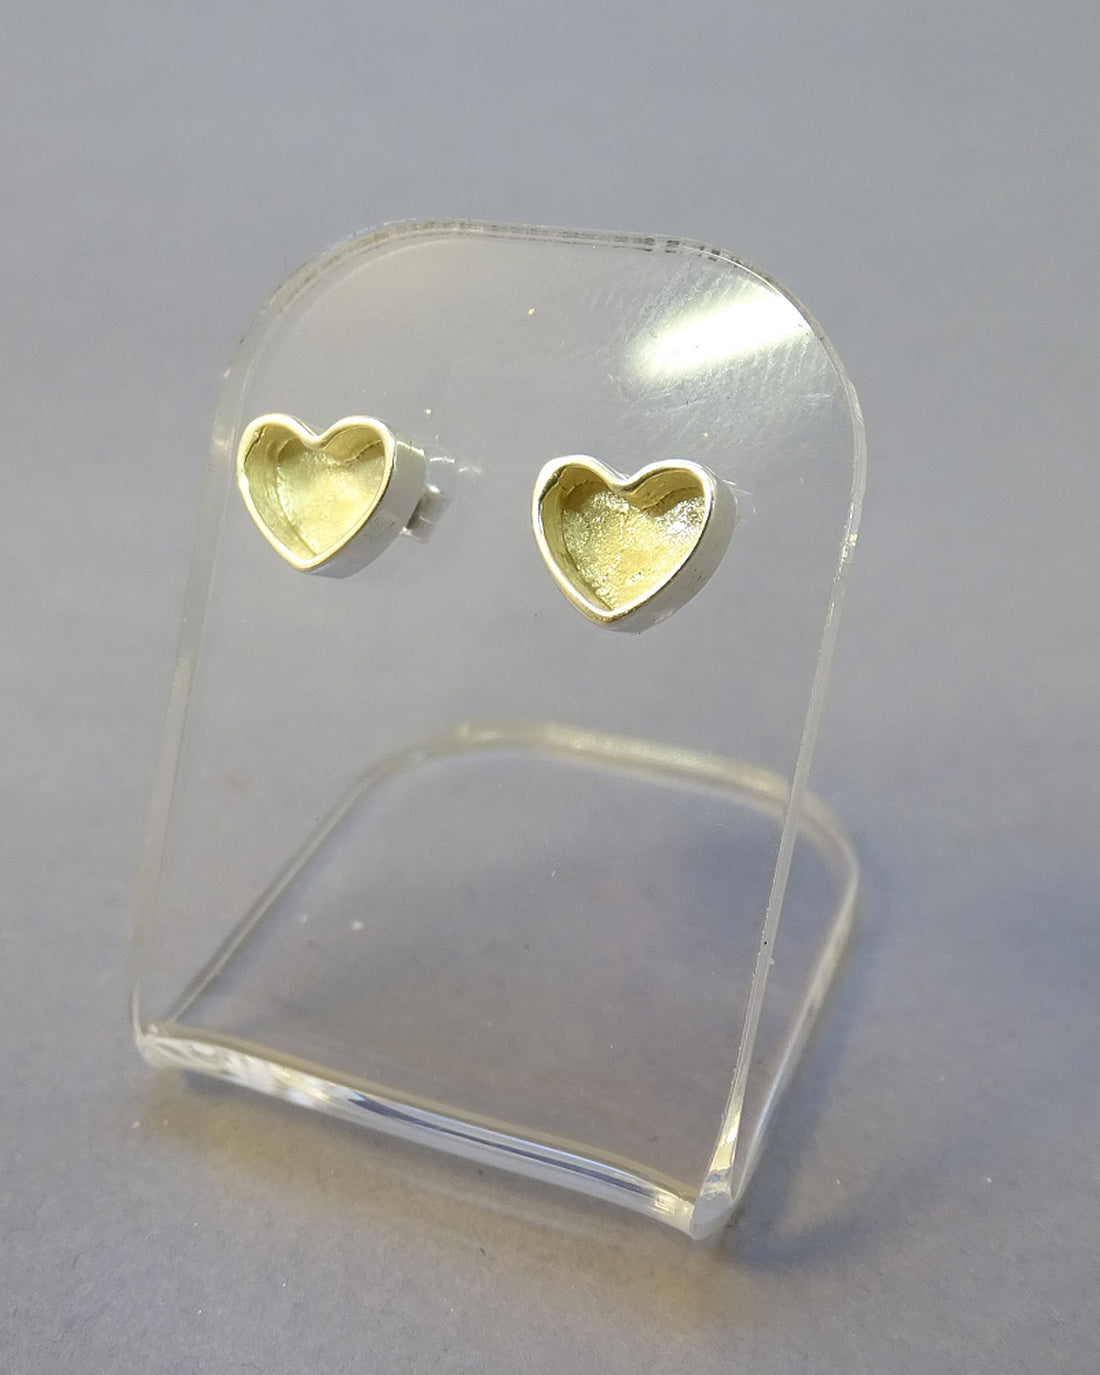 Small Heart Studs Suitable For Resin Or Cut Your Own Stones